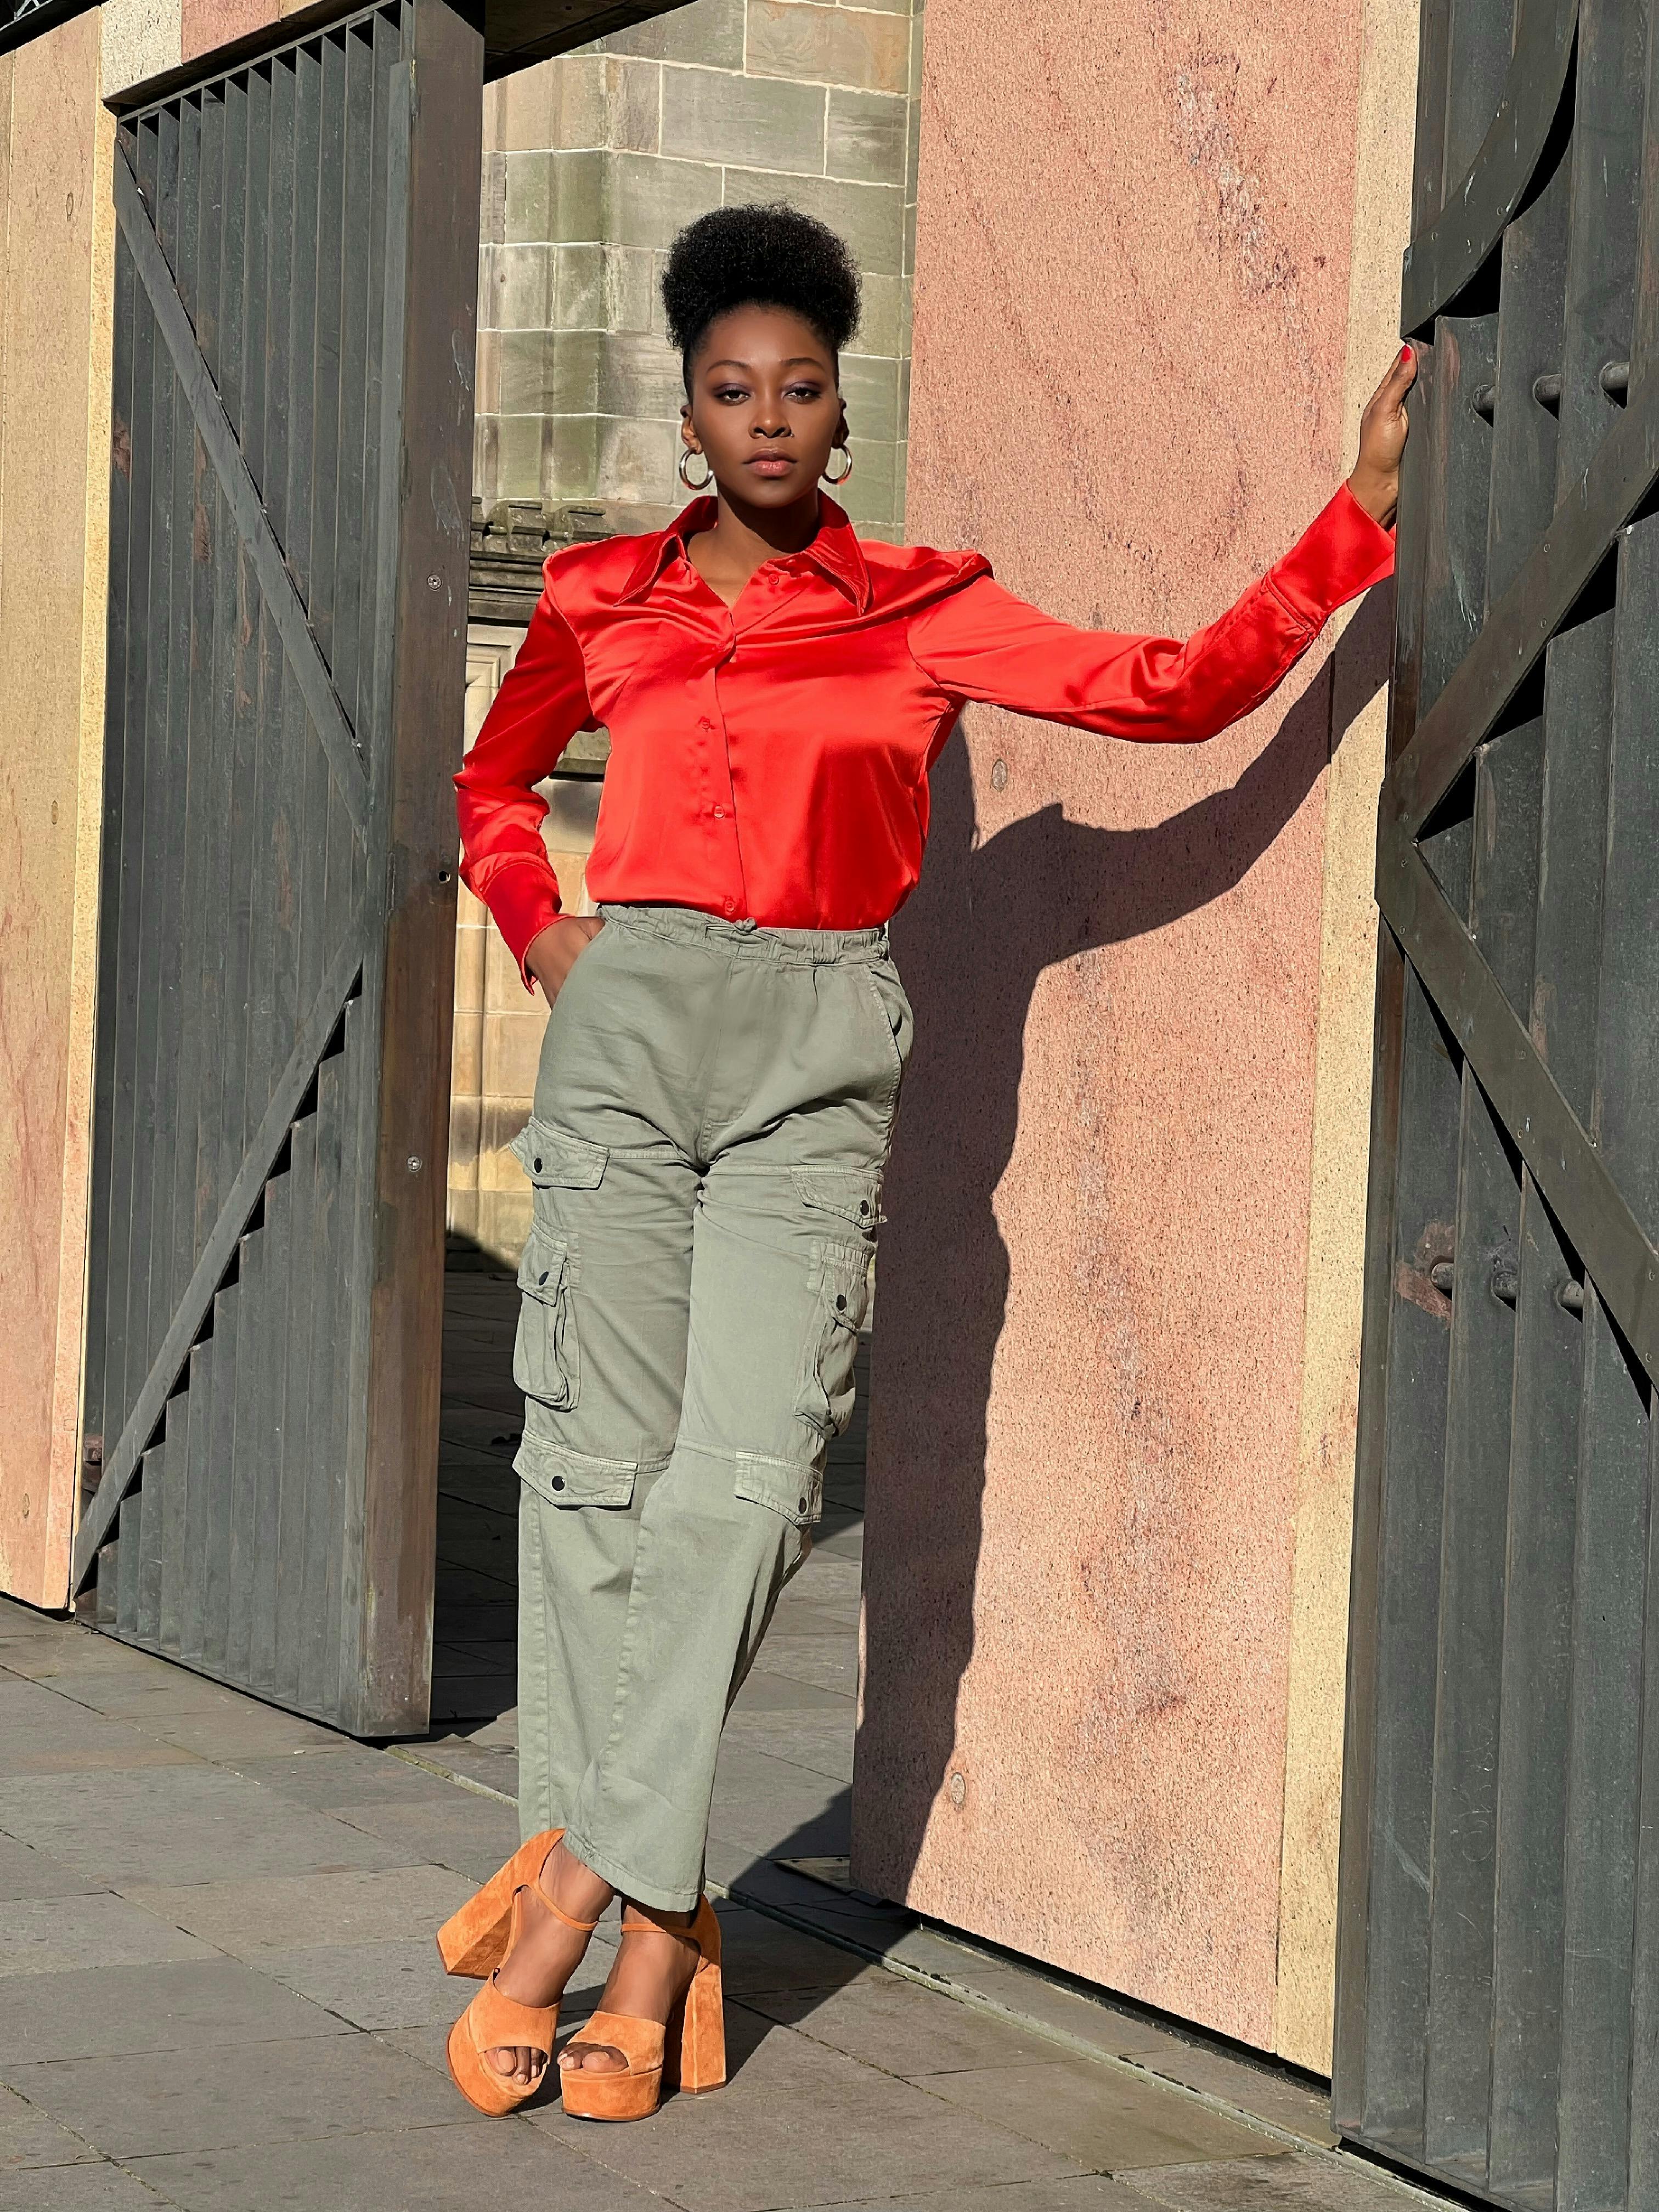 free photo of african woman posing in red shirt on a street